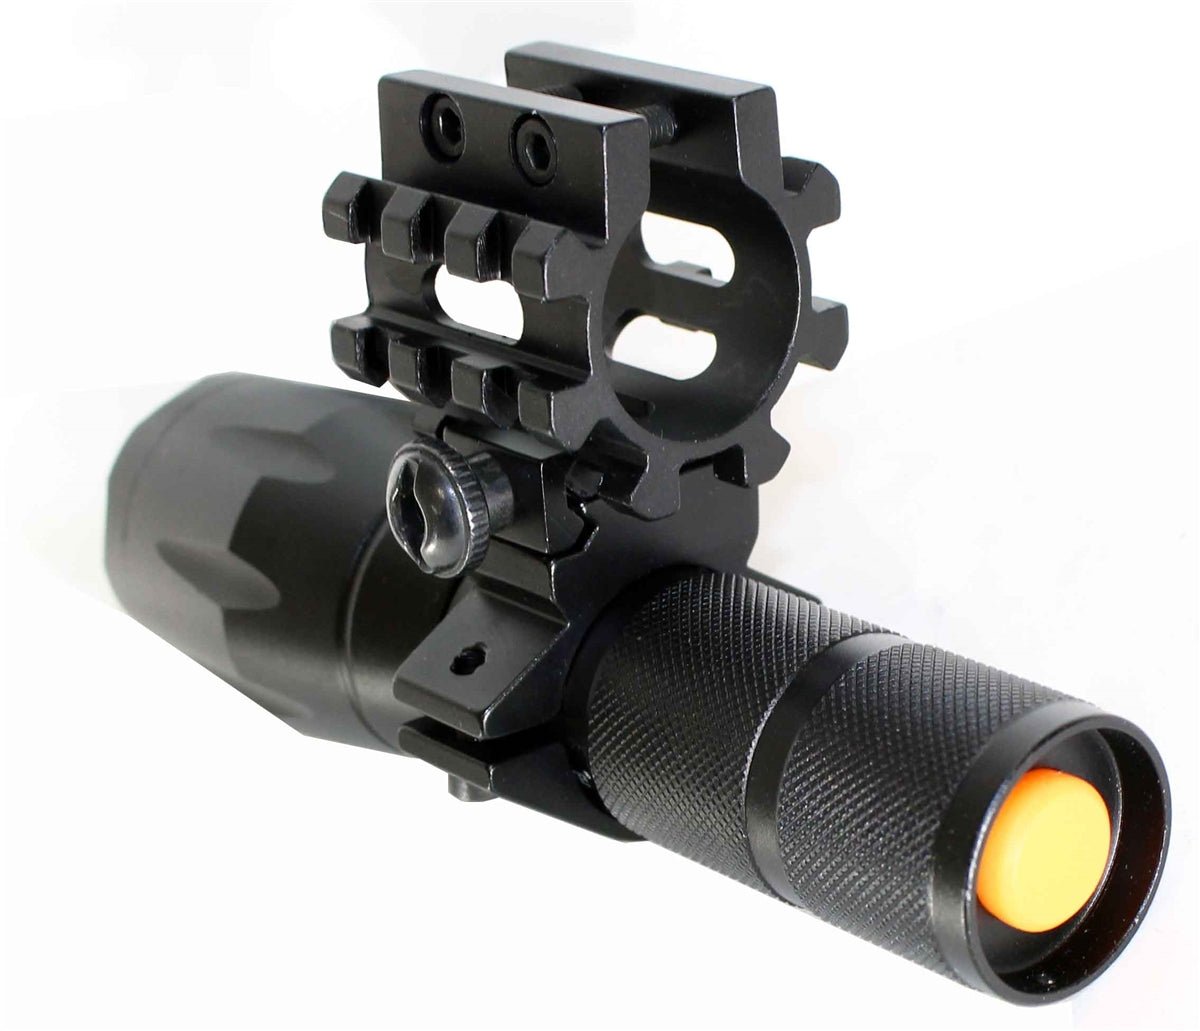 Trinity 1000 Lumen Hunting Light for Winchester sxp Defender Hunting Optics Tactical Security Home Defense Accessory Single Rail Mount. - TRINITY SUPPLY INC